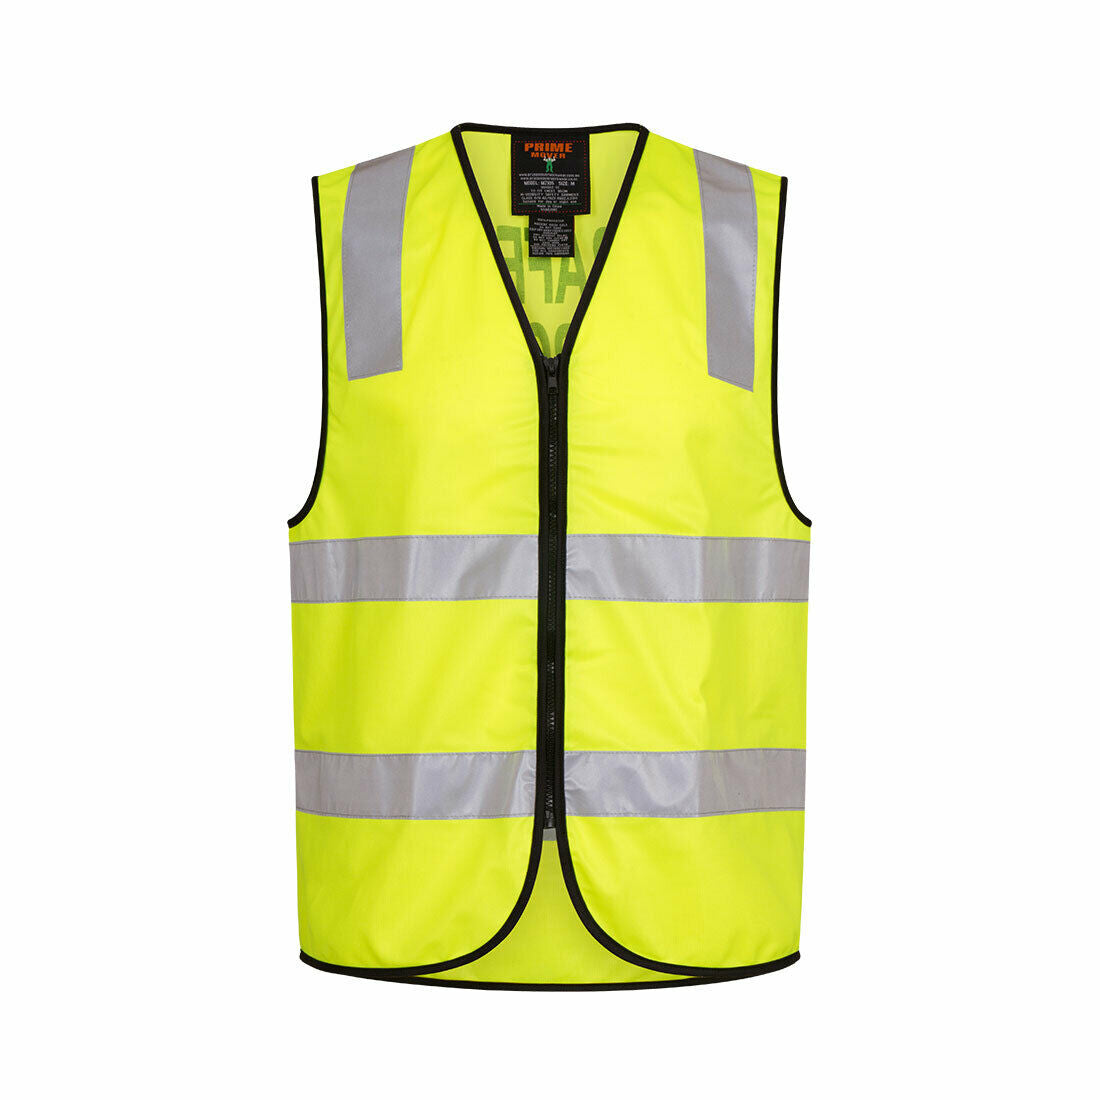 Portwest Visitor Zip Vest D/N 2 Tone Reflective Tape Work Safety MZ106-Collins Clothing Co